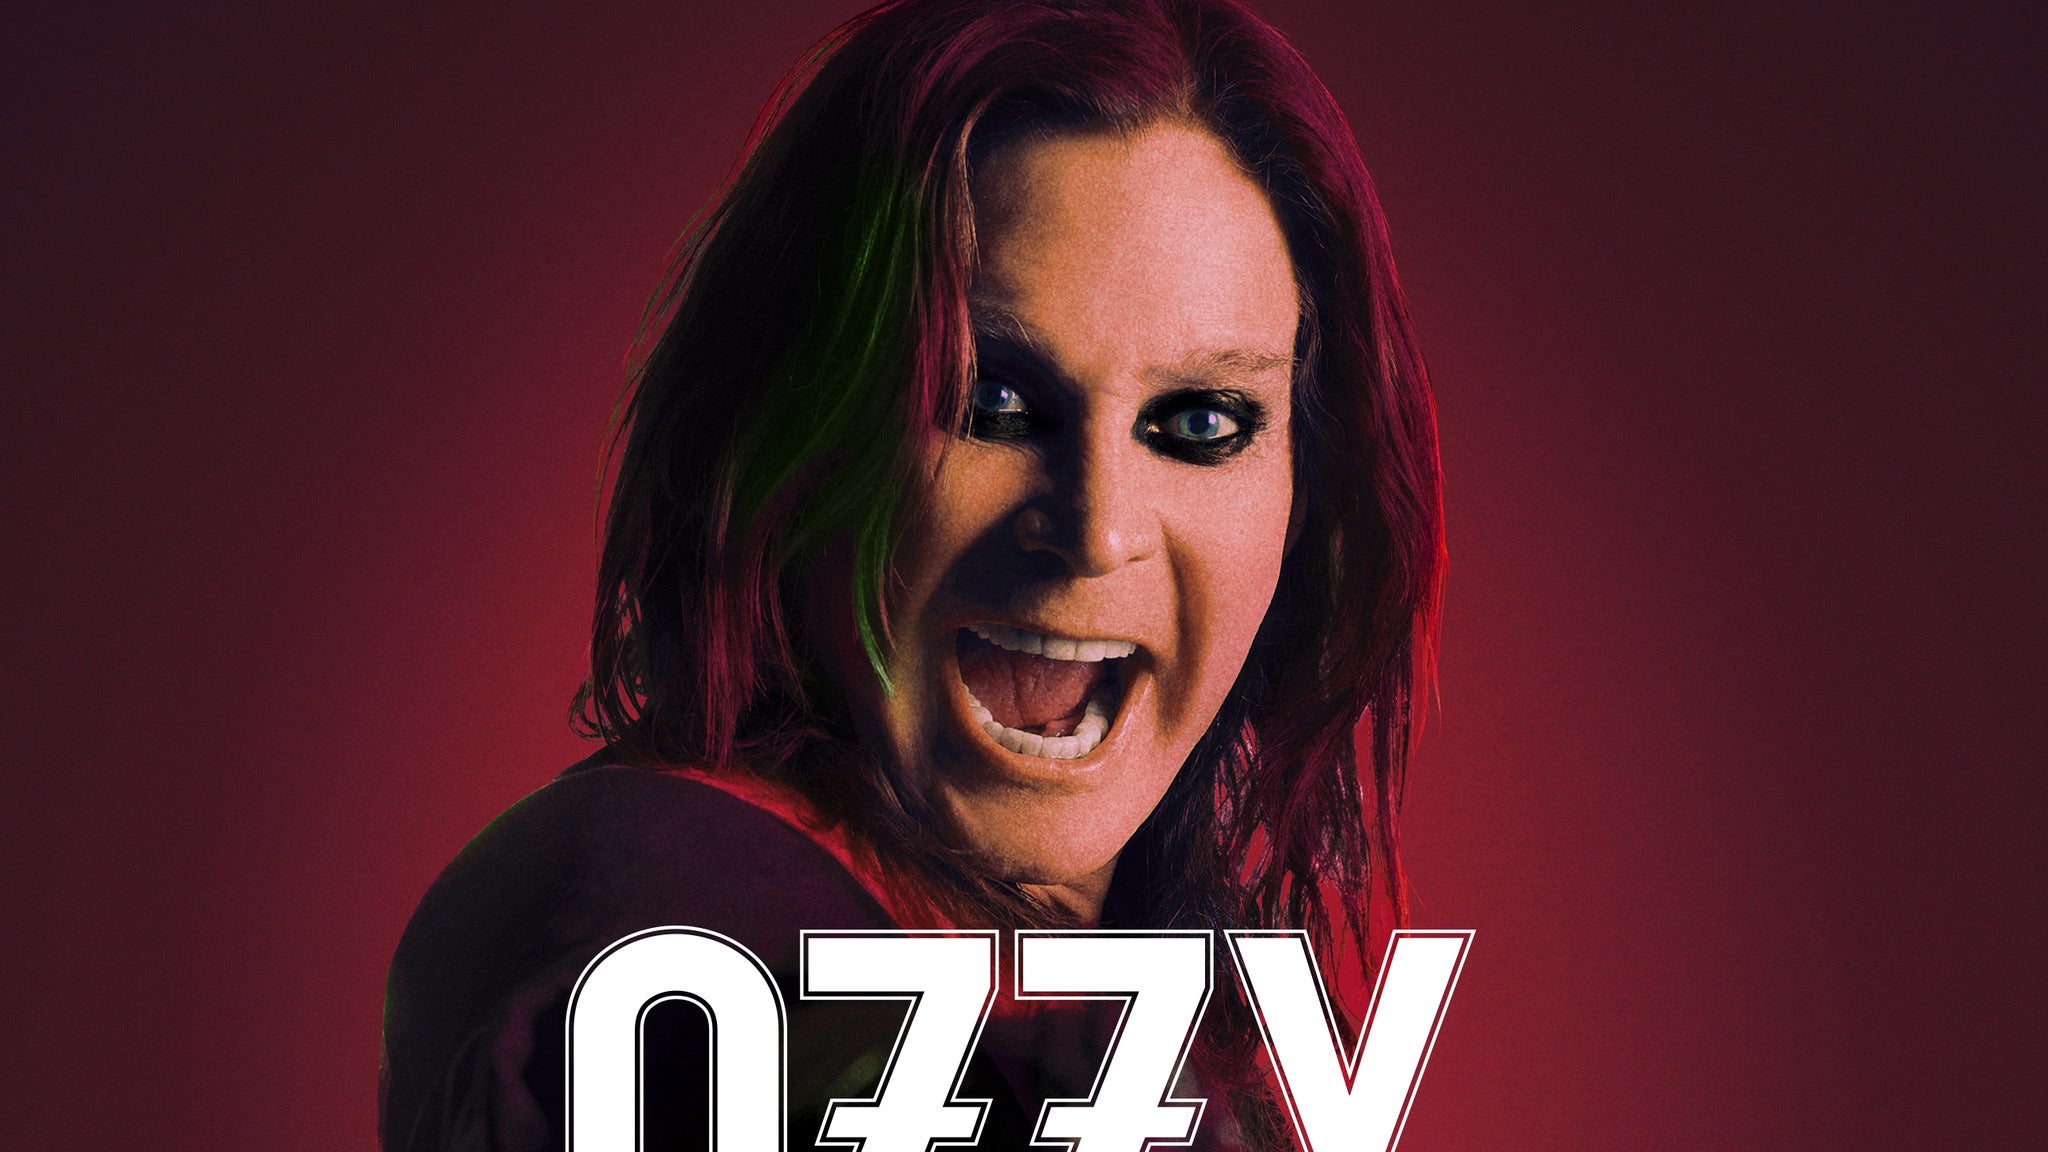 Ozzy Osbourne "No More Tours 2" - ULTIMATE